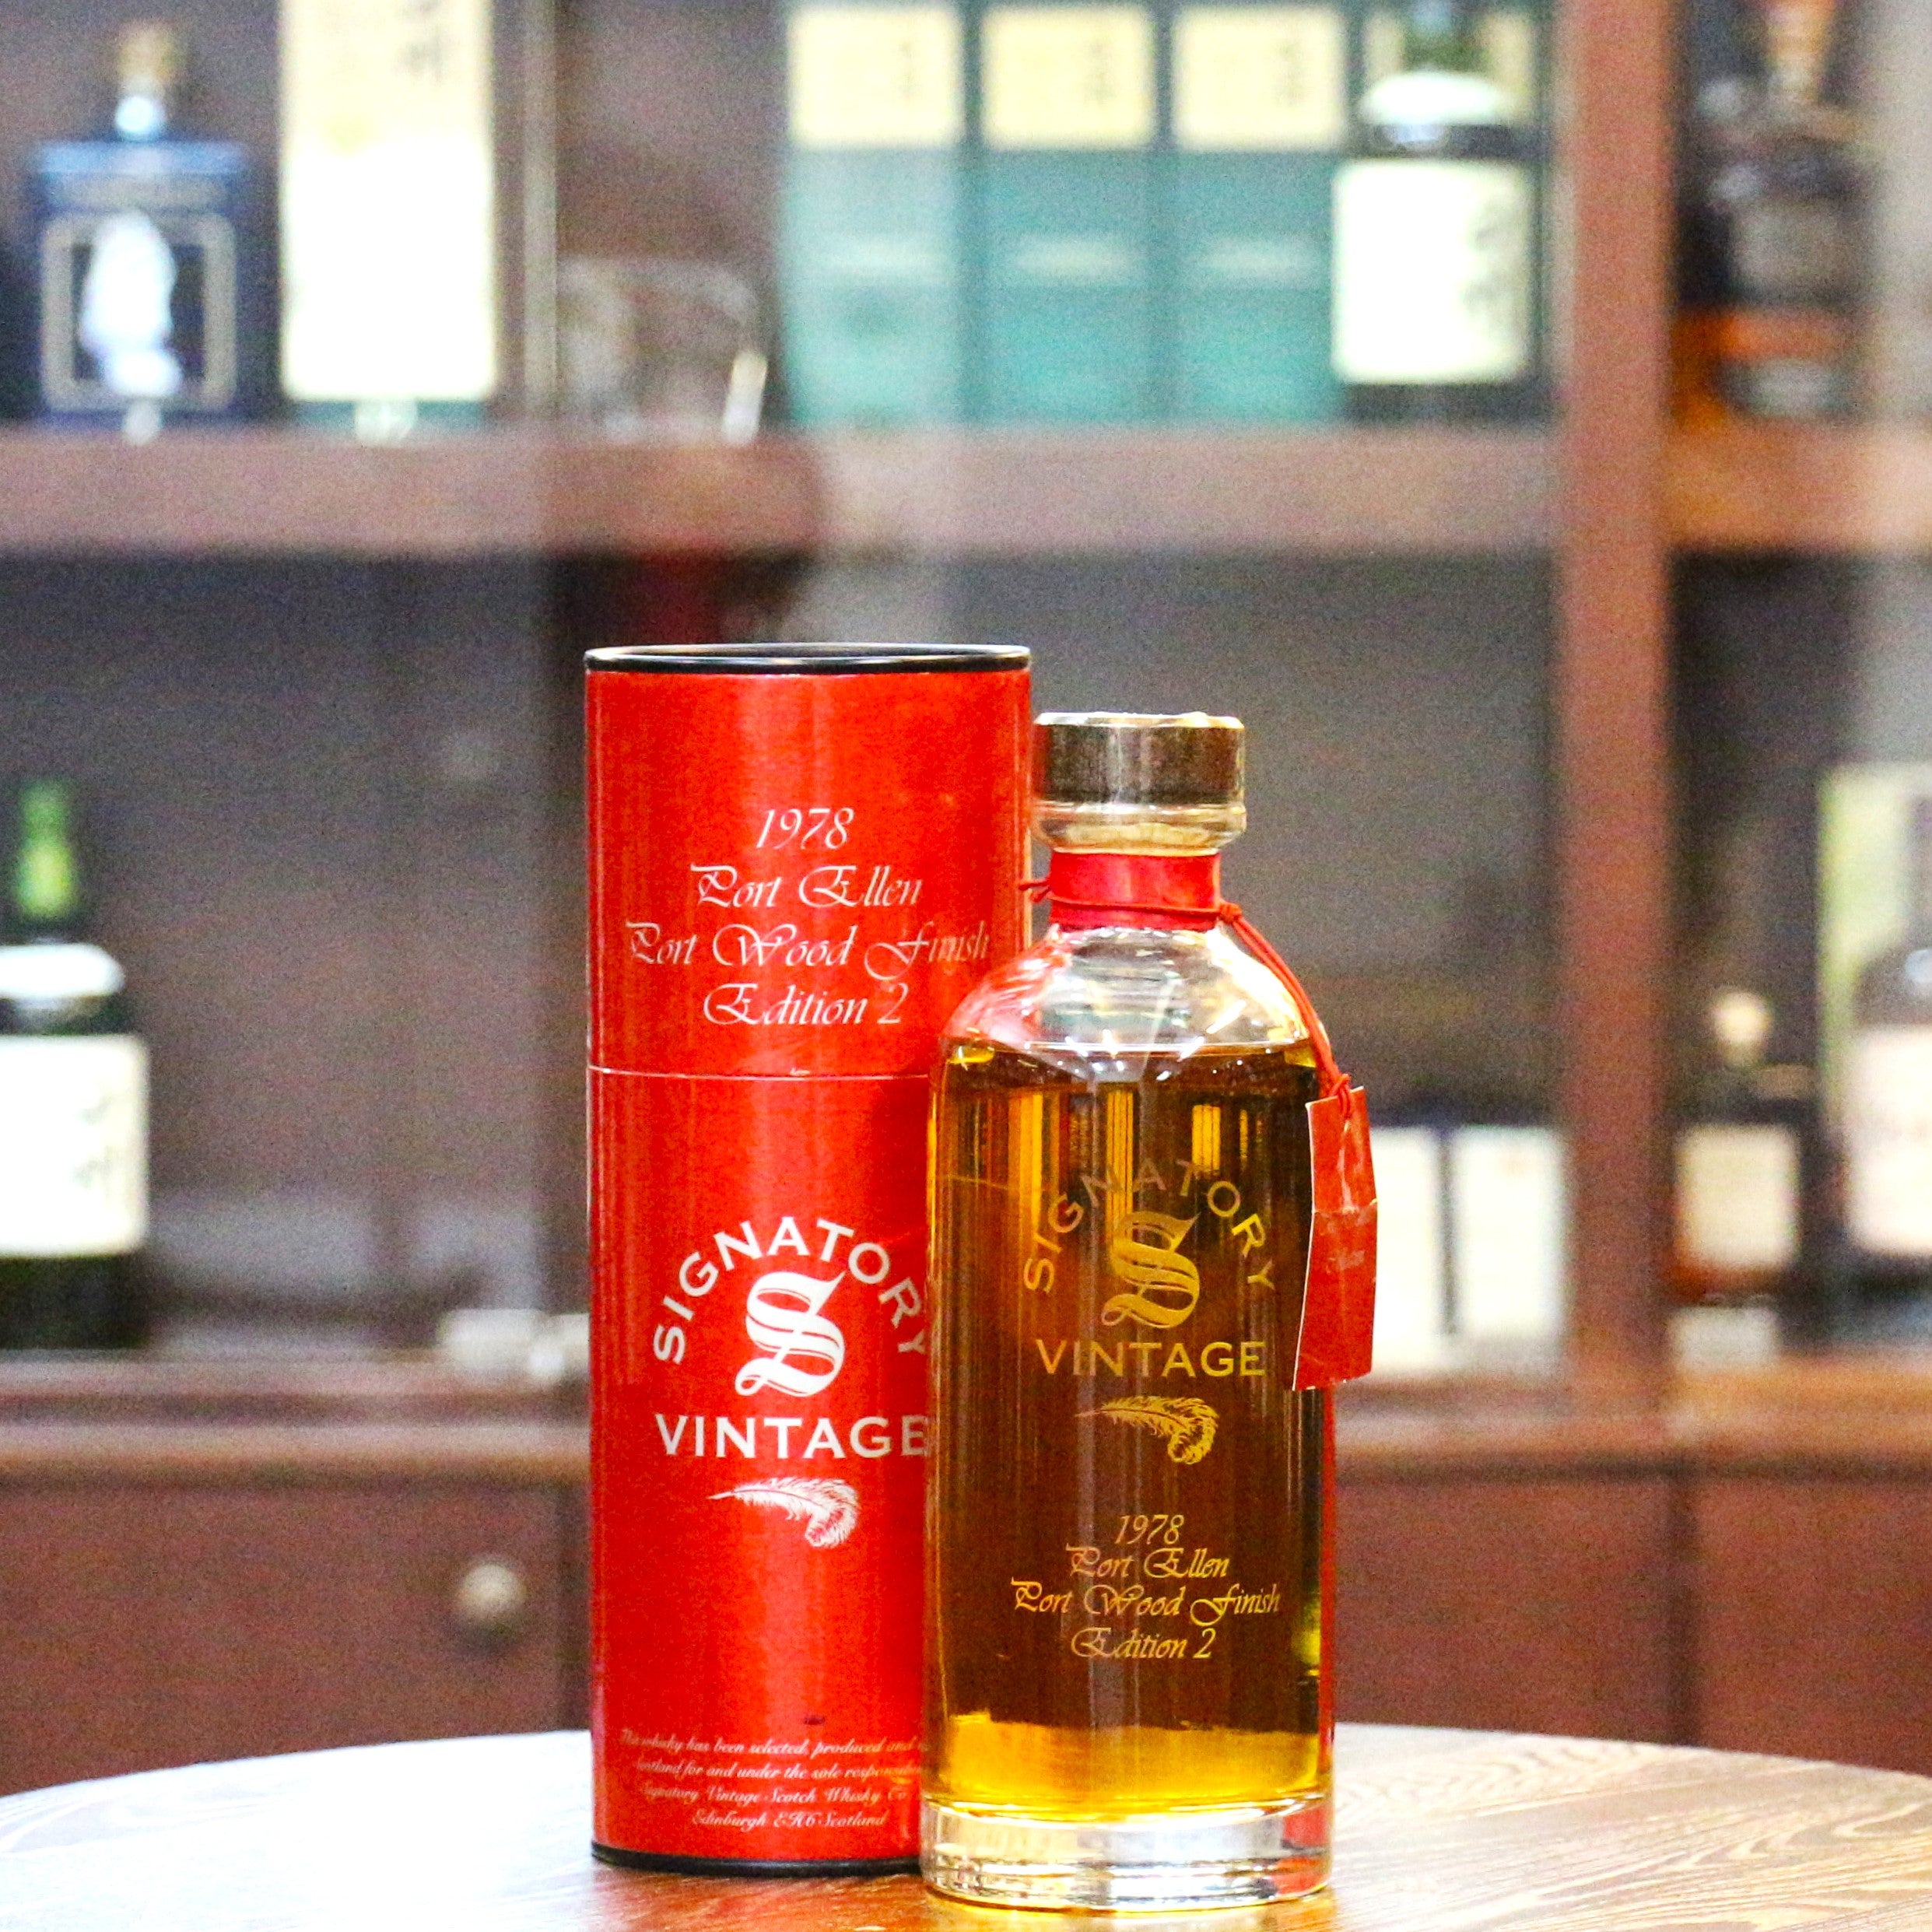 This is an independent Single Cask bottling by Signatory and a rare Port Wood finish.